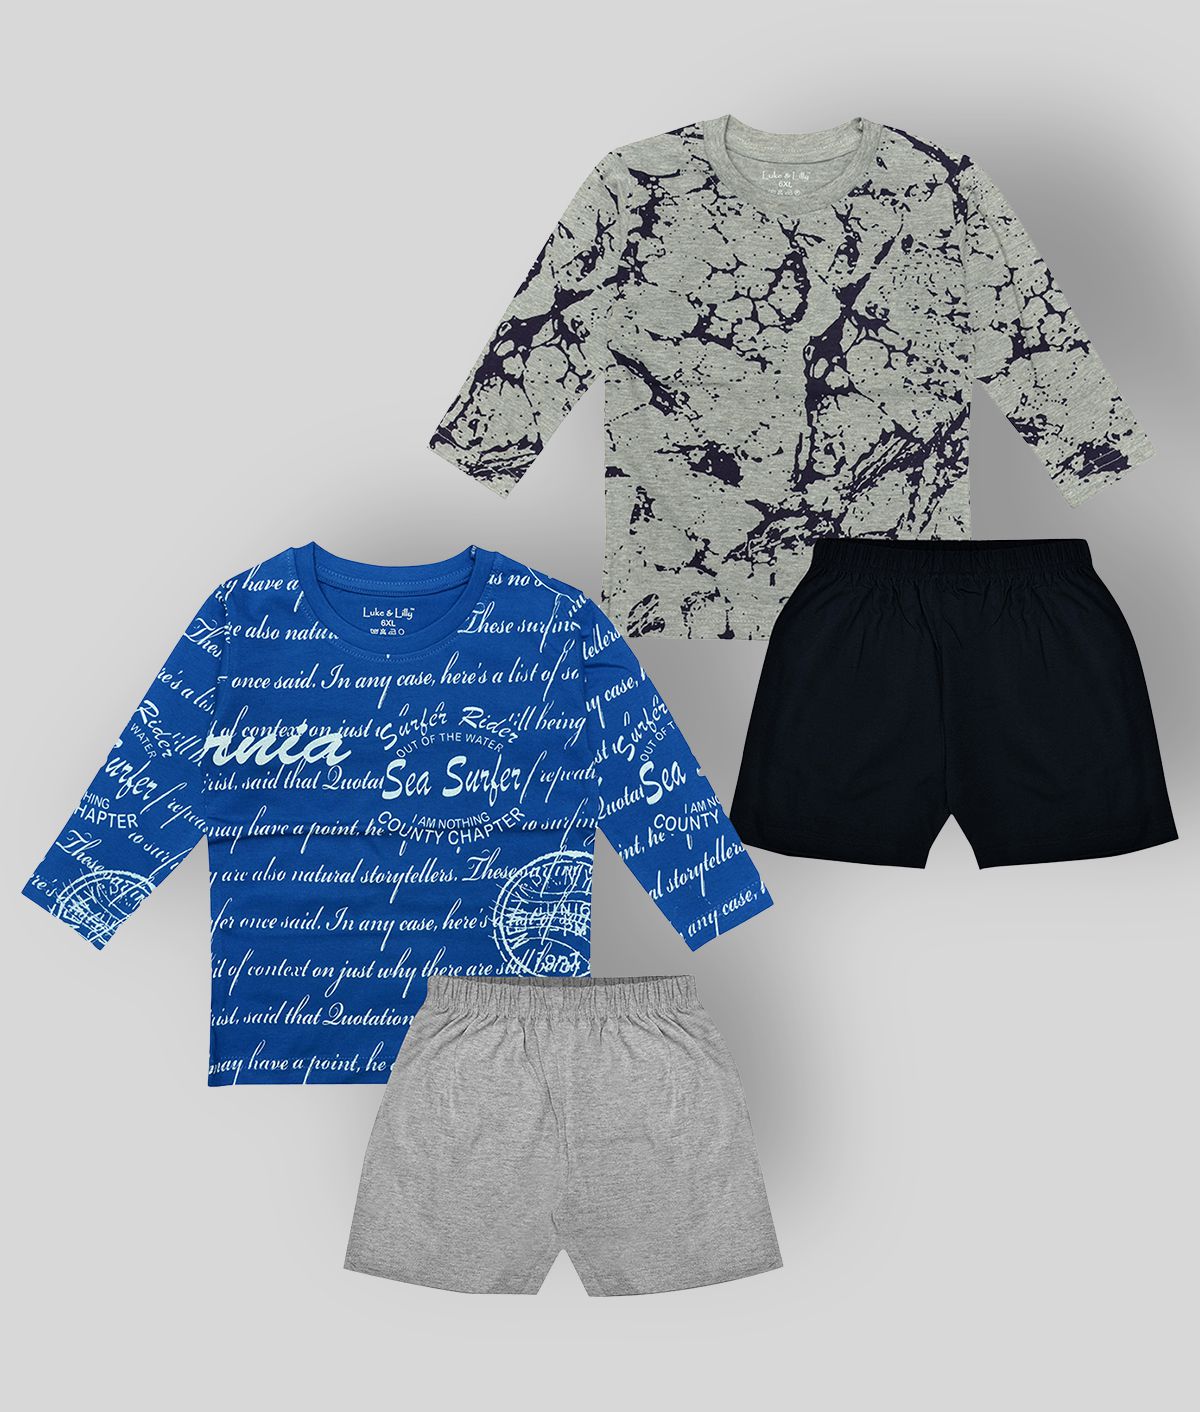 Luke and Lilly - Multi Cotton Boy's T-Shirt & Shorts ( Pack of 2 )